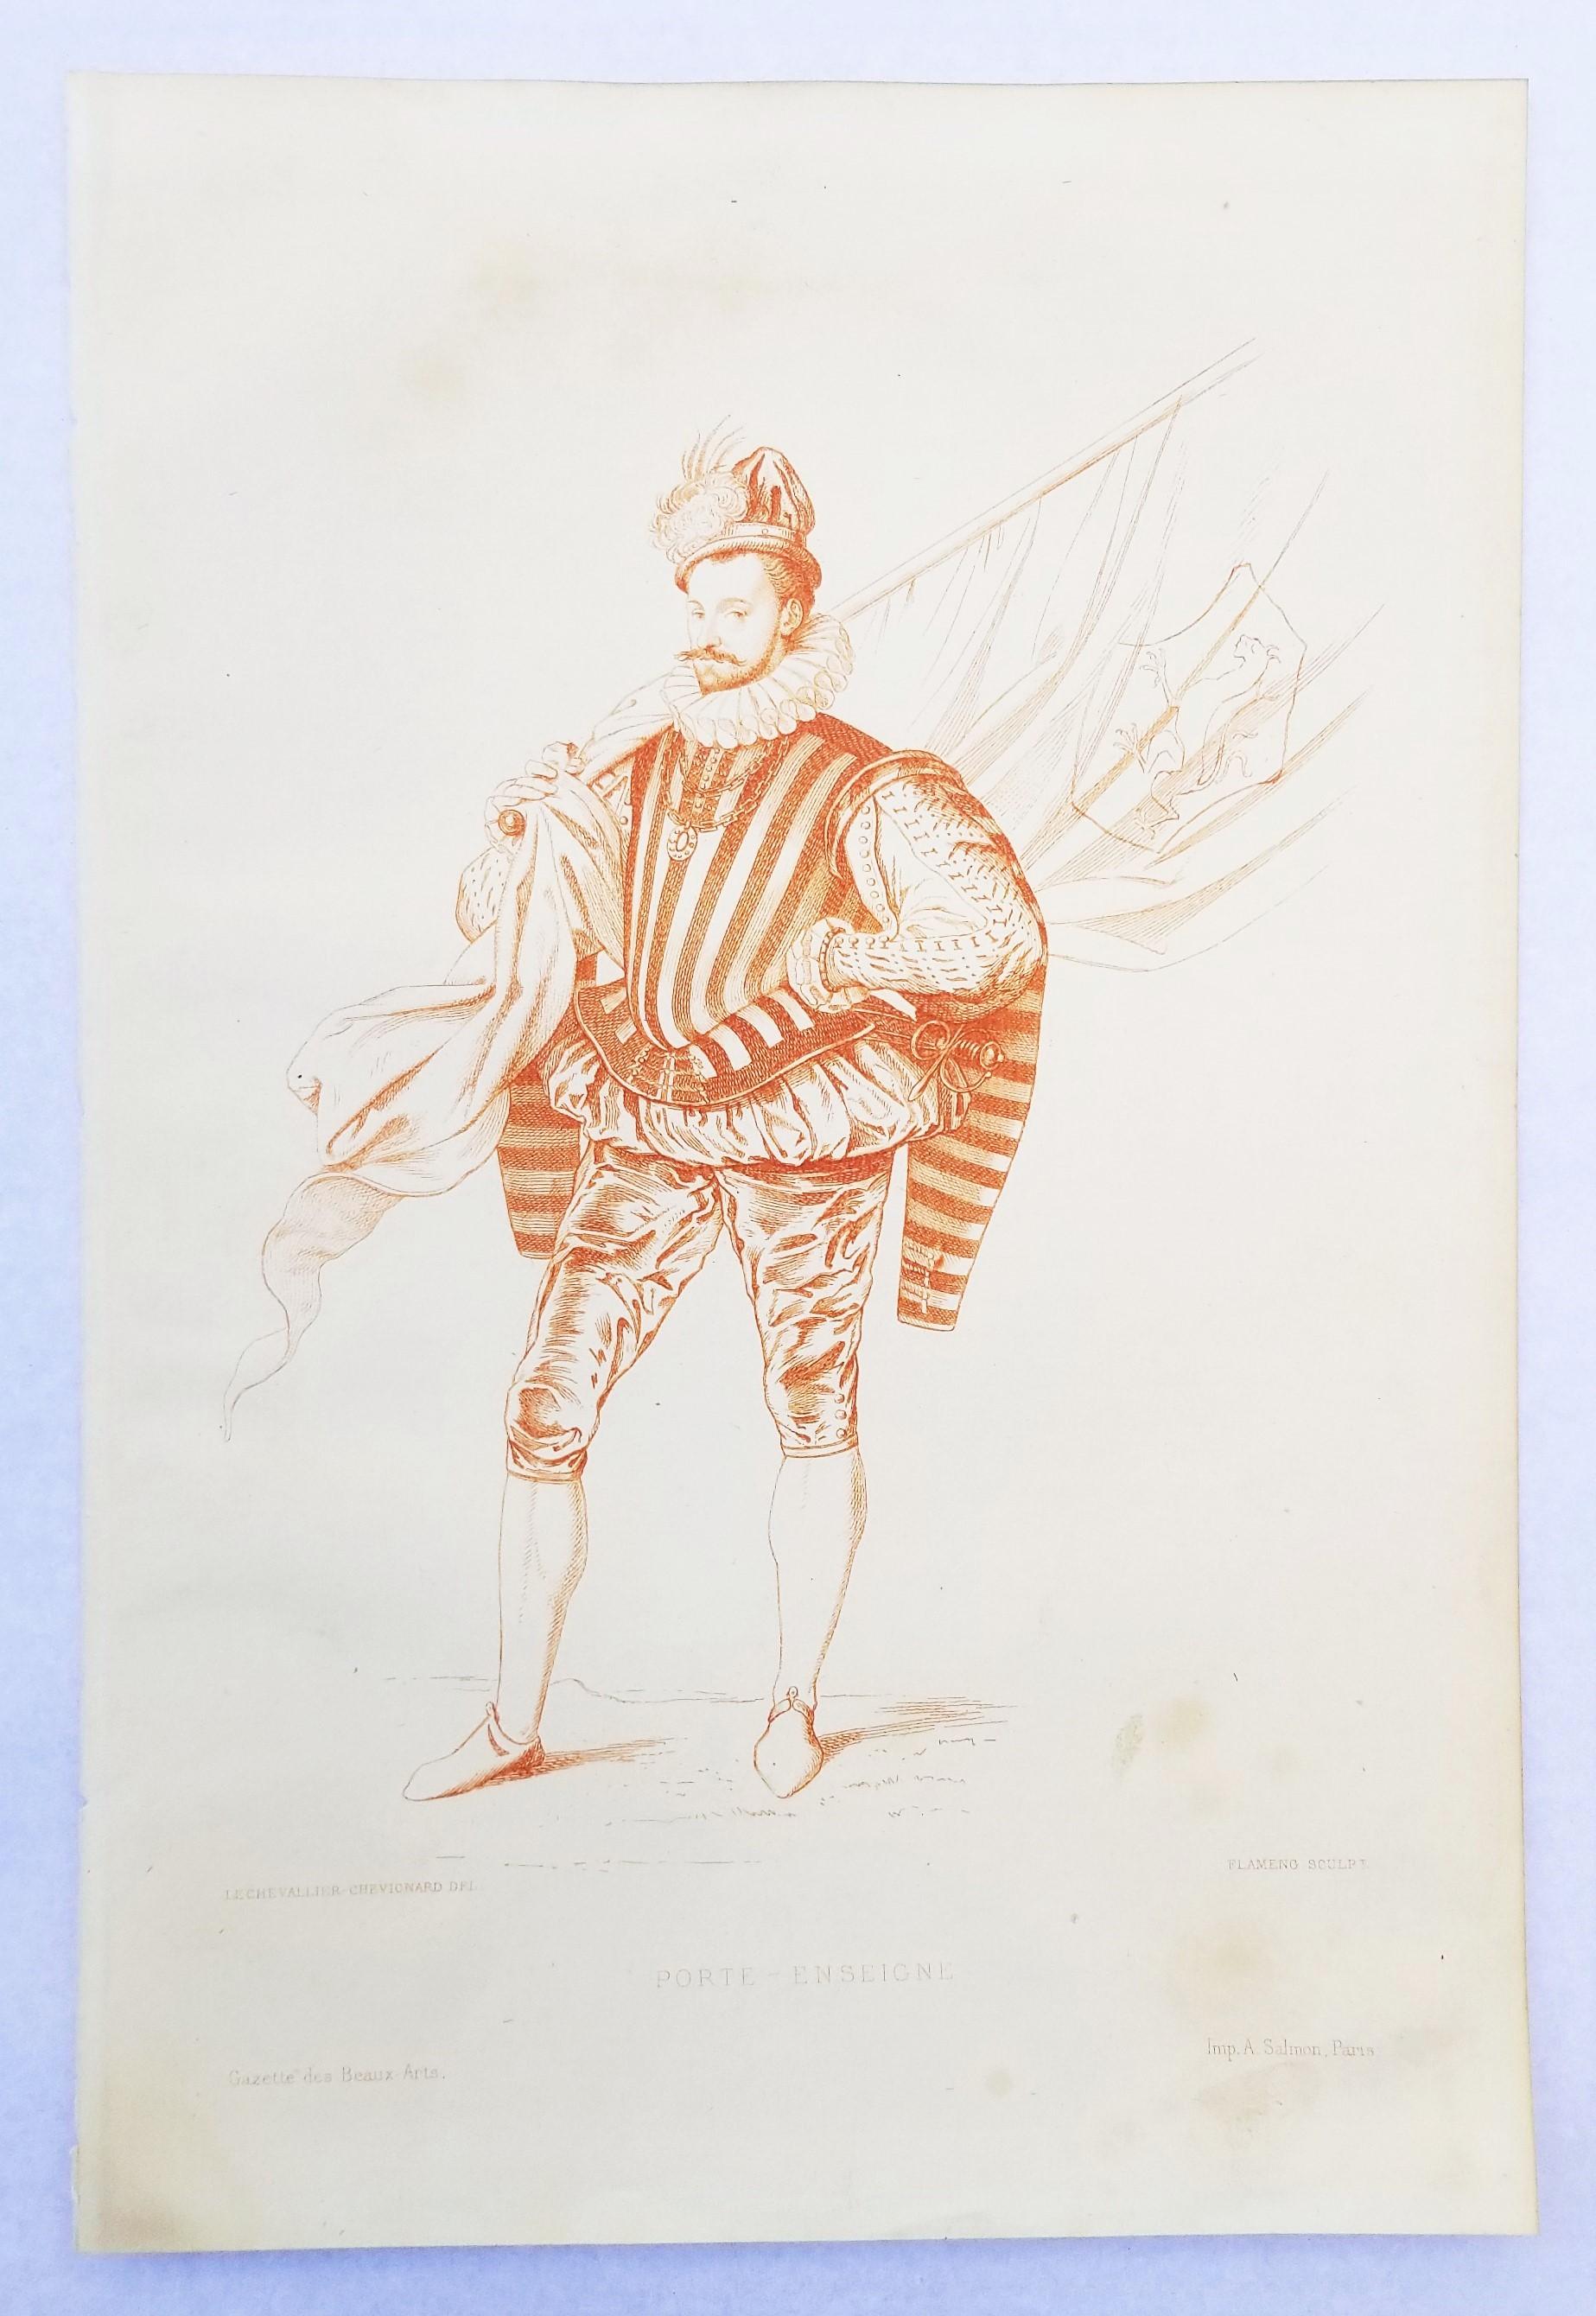 Porte-Enseigne (Sign Holder) /// Old Masters Antique Etching Figurative Soldier - Beige Figurative Print by Léopold Flameng